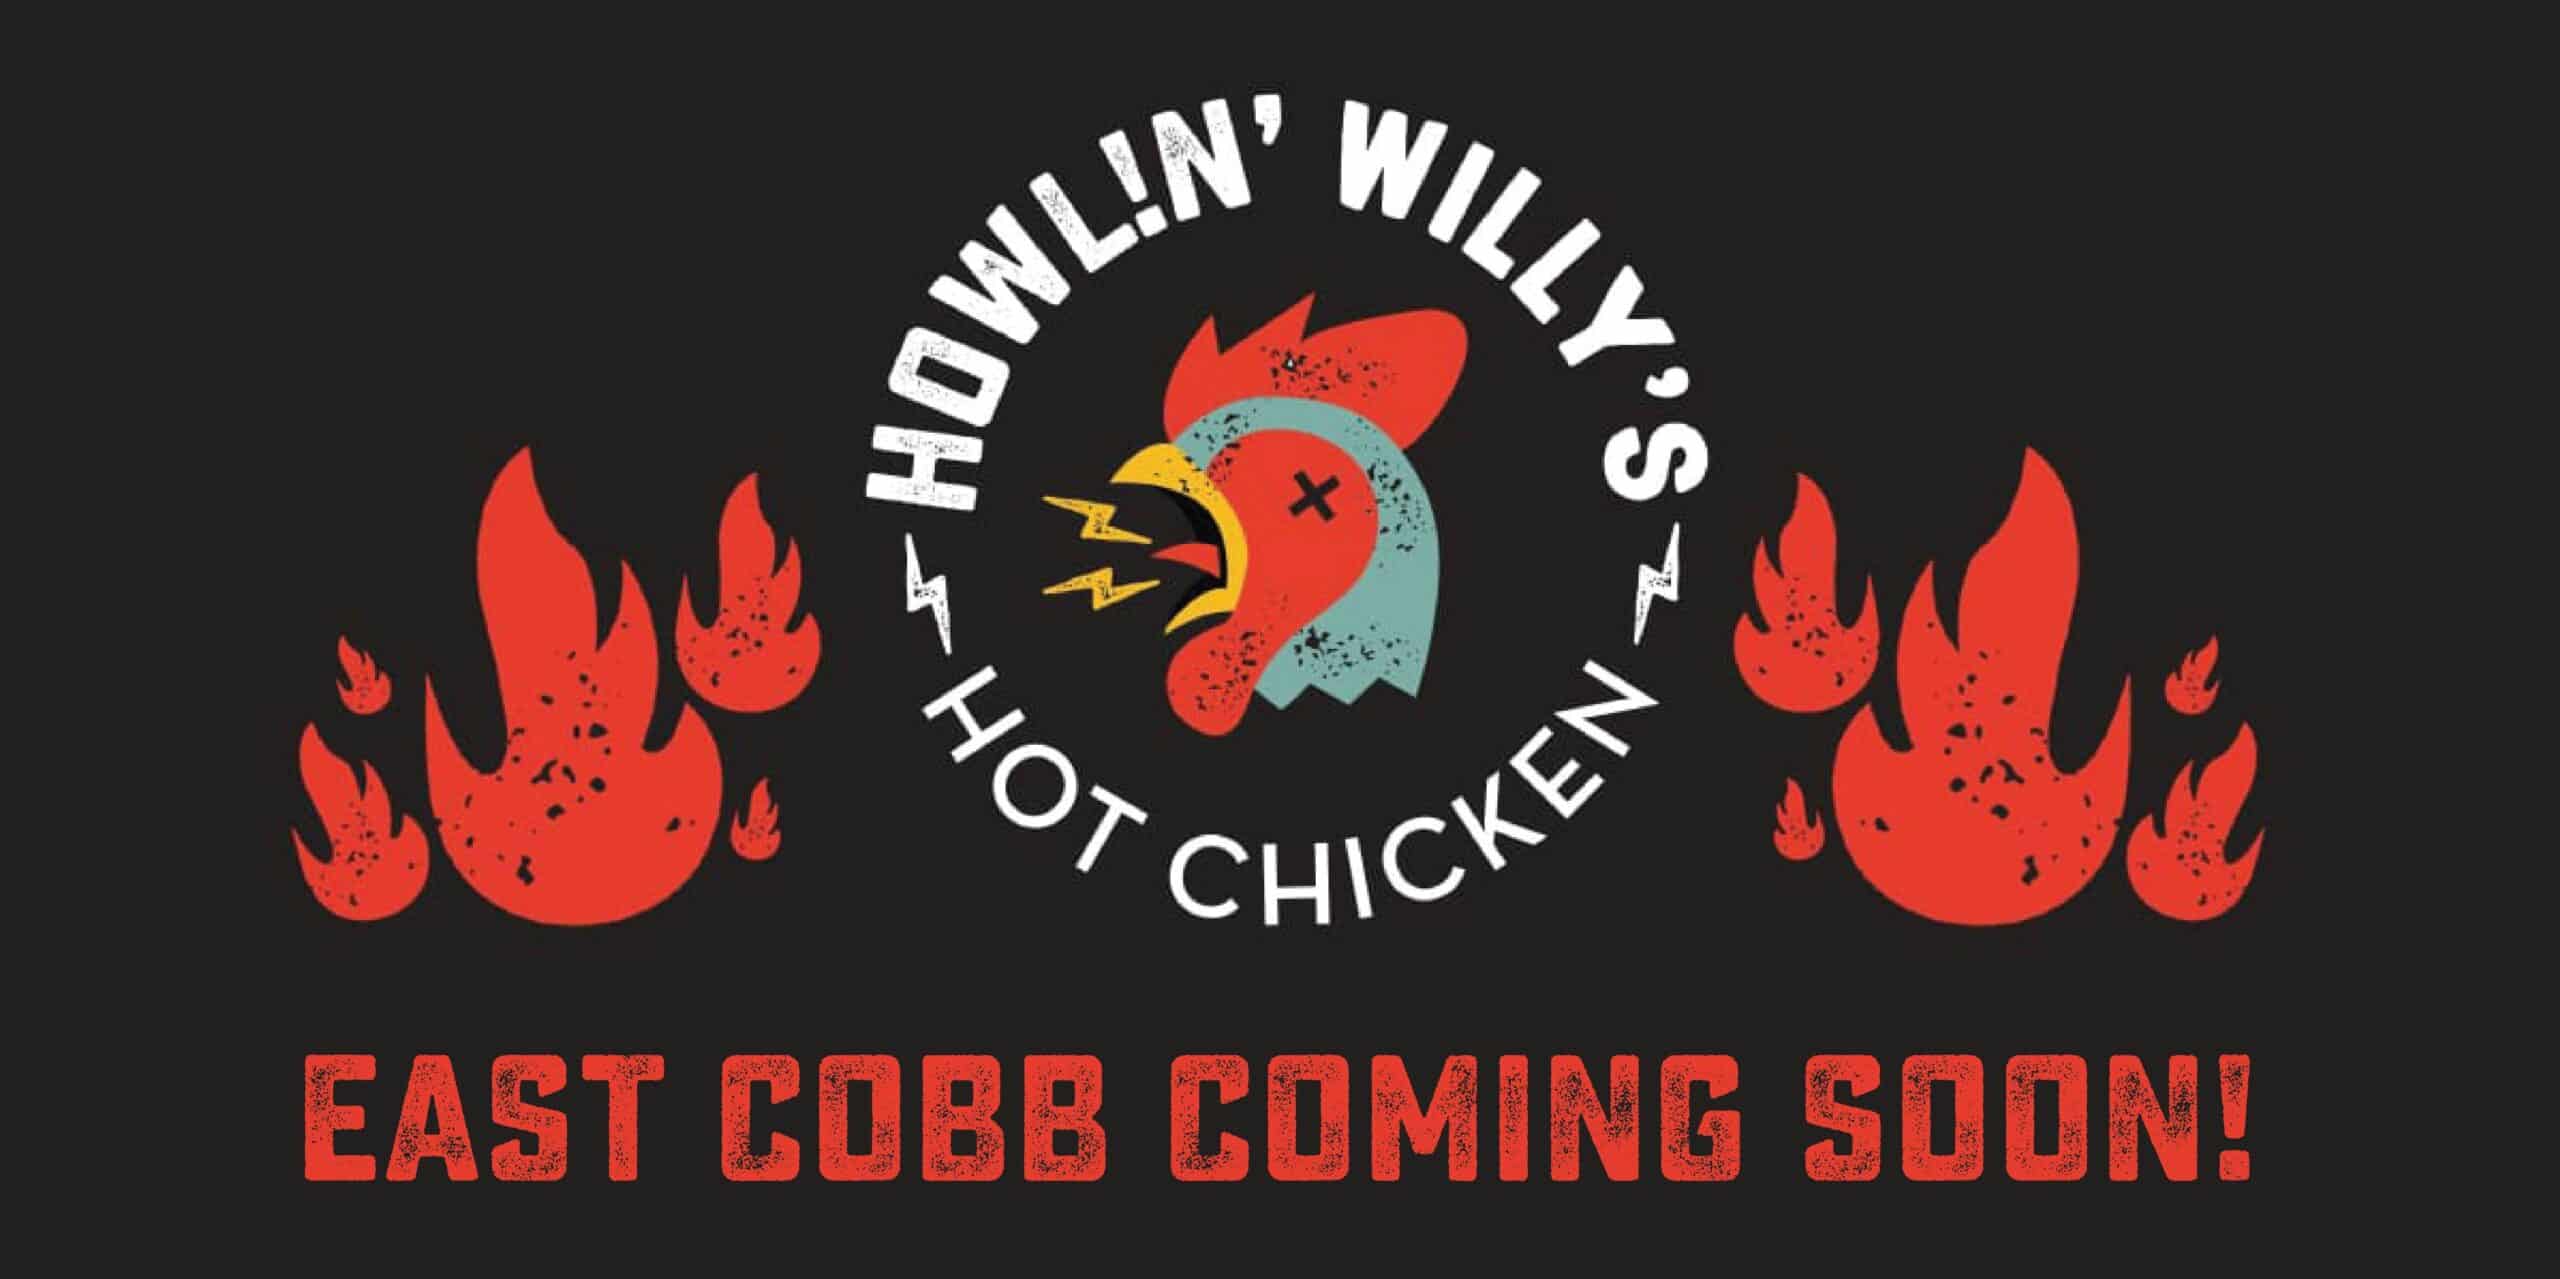 Howlin’ Willy’s Hot Chicken Coming Soon to East Cobb!